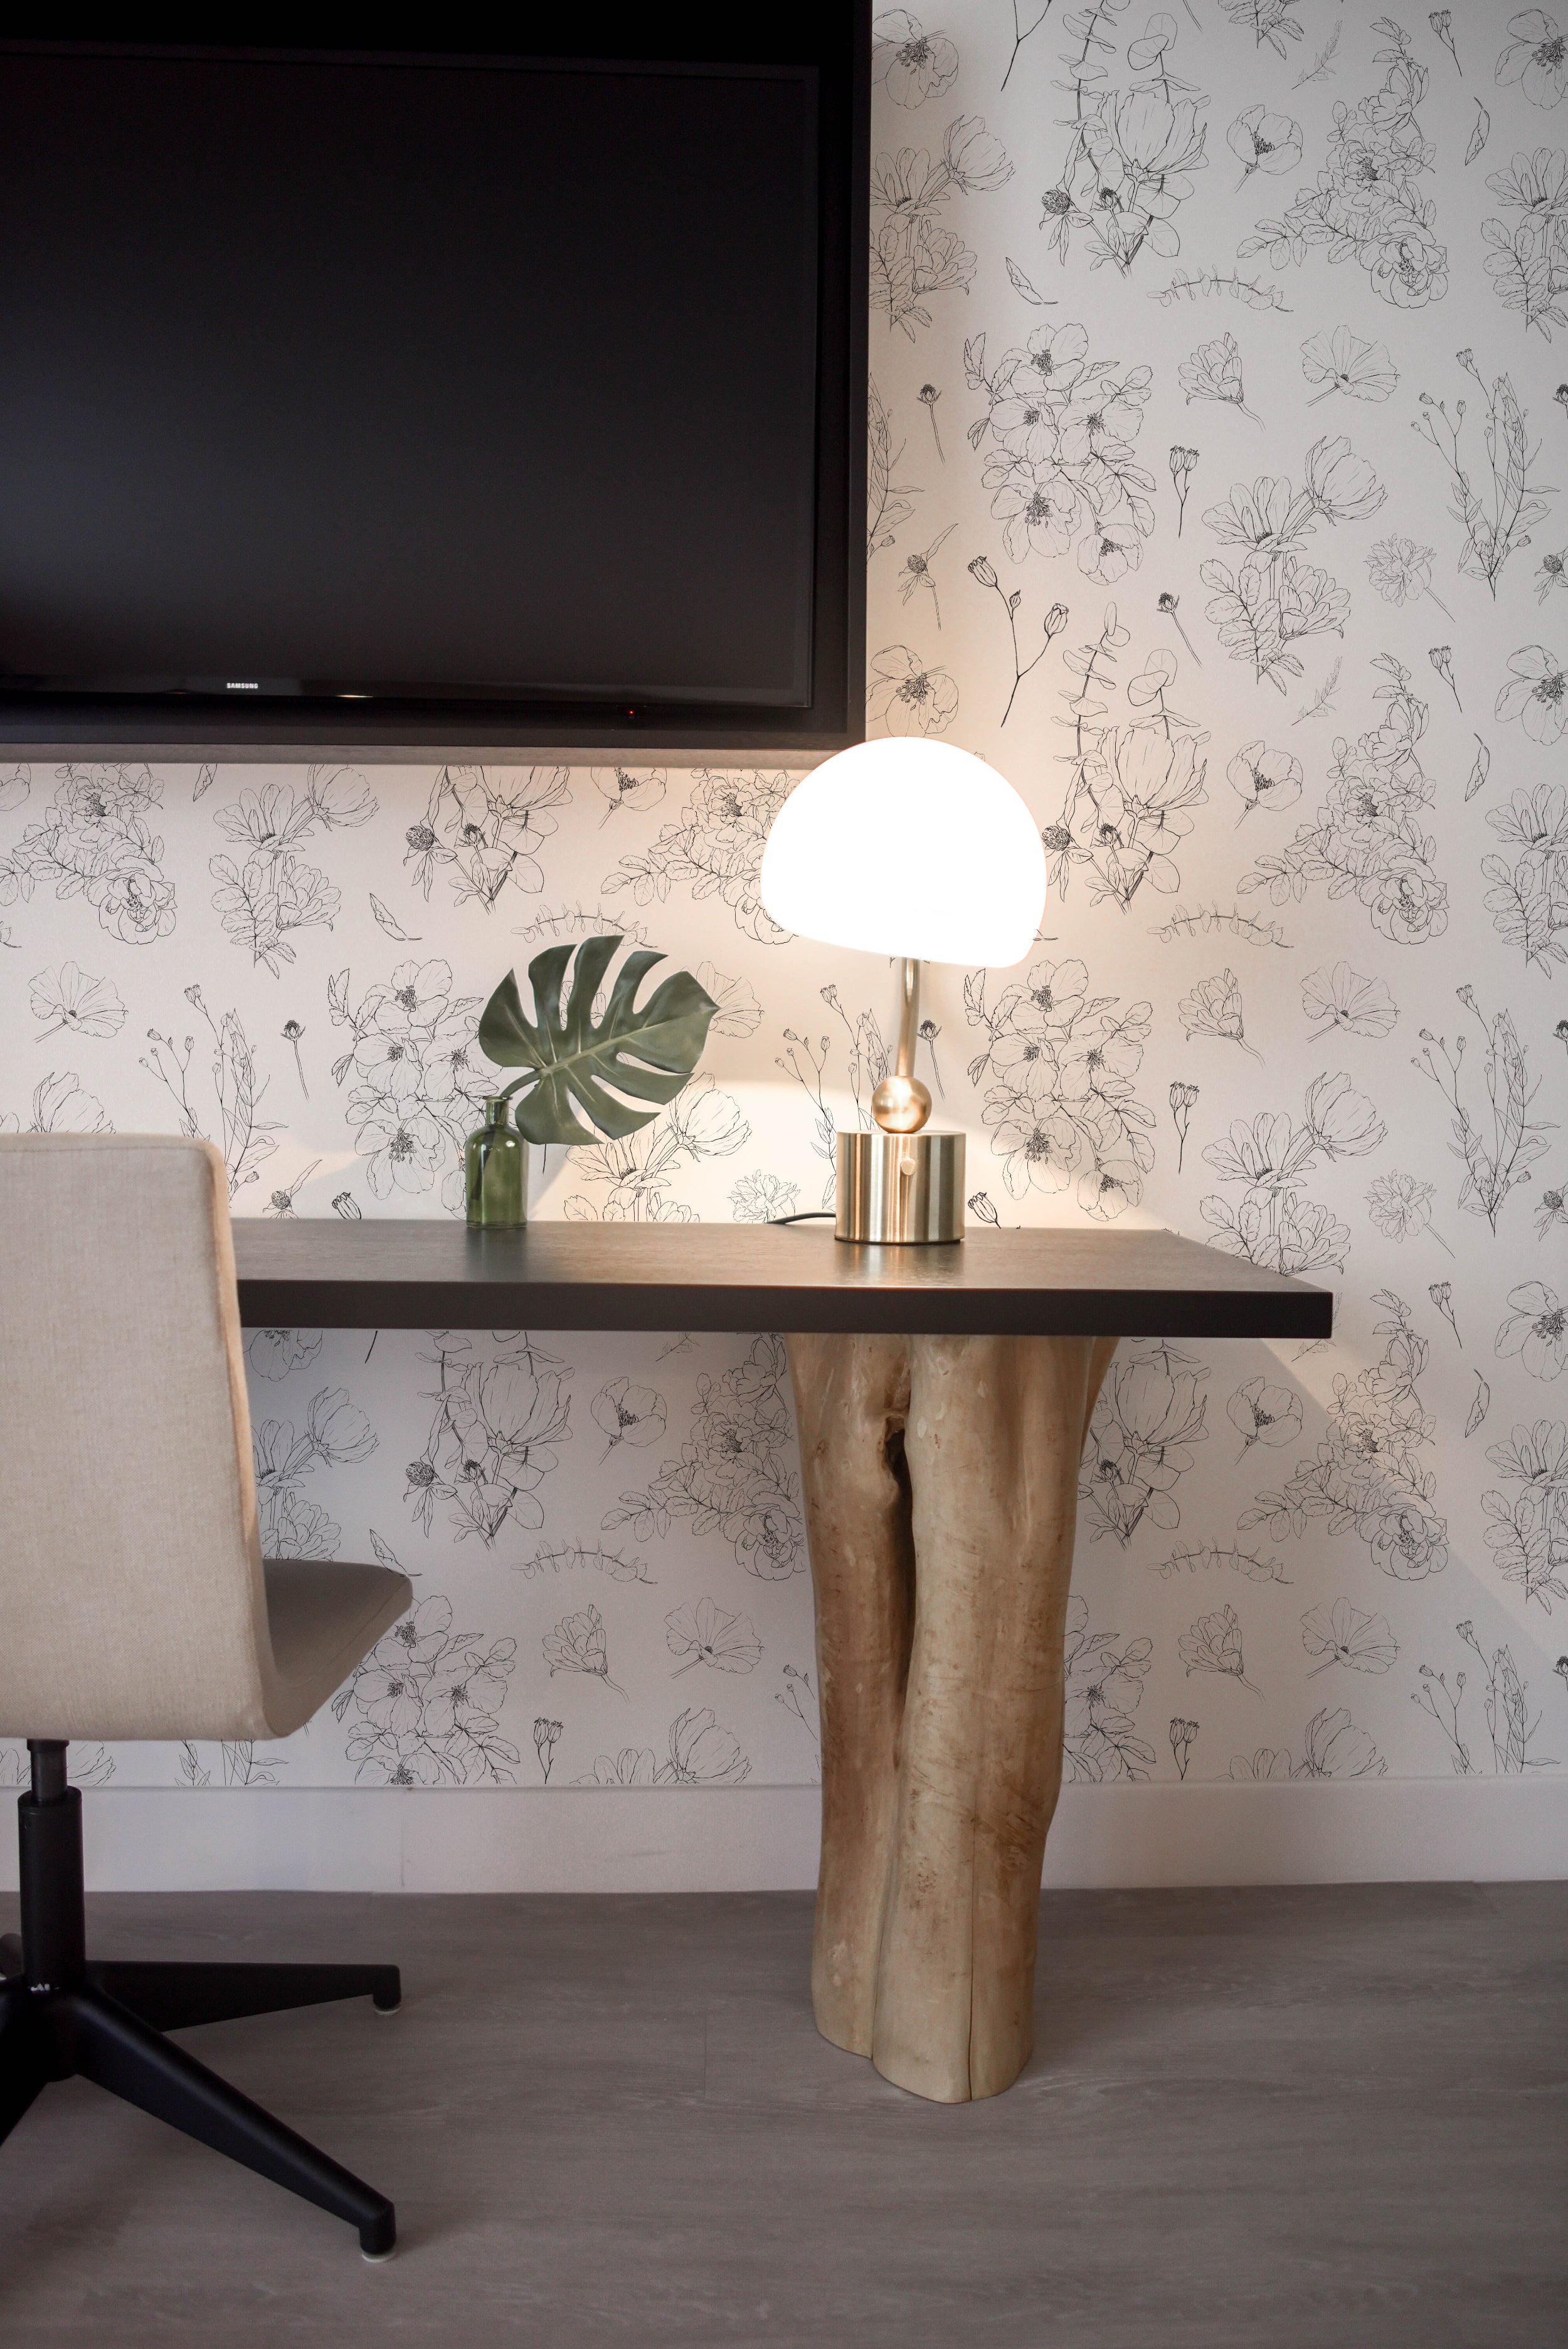 A modern workspace setup against a backdrop of Wildflower Sketch Wallpaper, which displays a minimalistic black-on-white floral design. The workspace includes a sleek, dark wooden desk supported by a unique, organic-shaped, cream-colored base that resembles a tree trunk. A contemporary round lamp with a frosted glass shade sits on the desk, accompanied by a monstera leaf in a green glass vase, and the room is completed with a flat-screen TV mounted on the wall above.